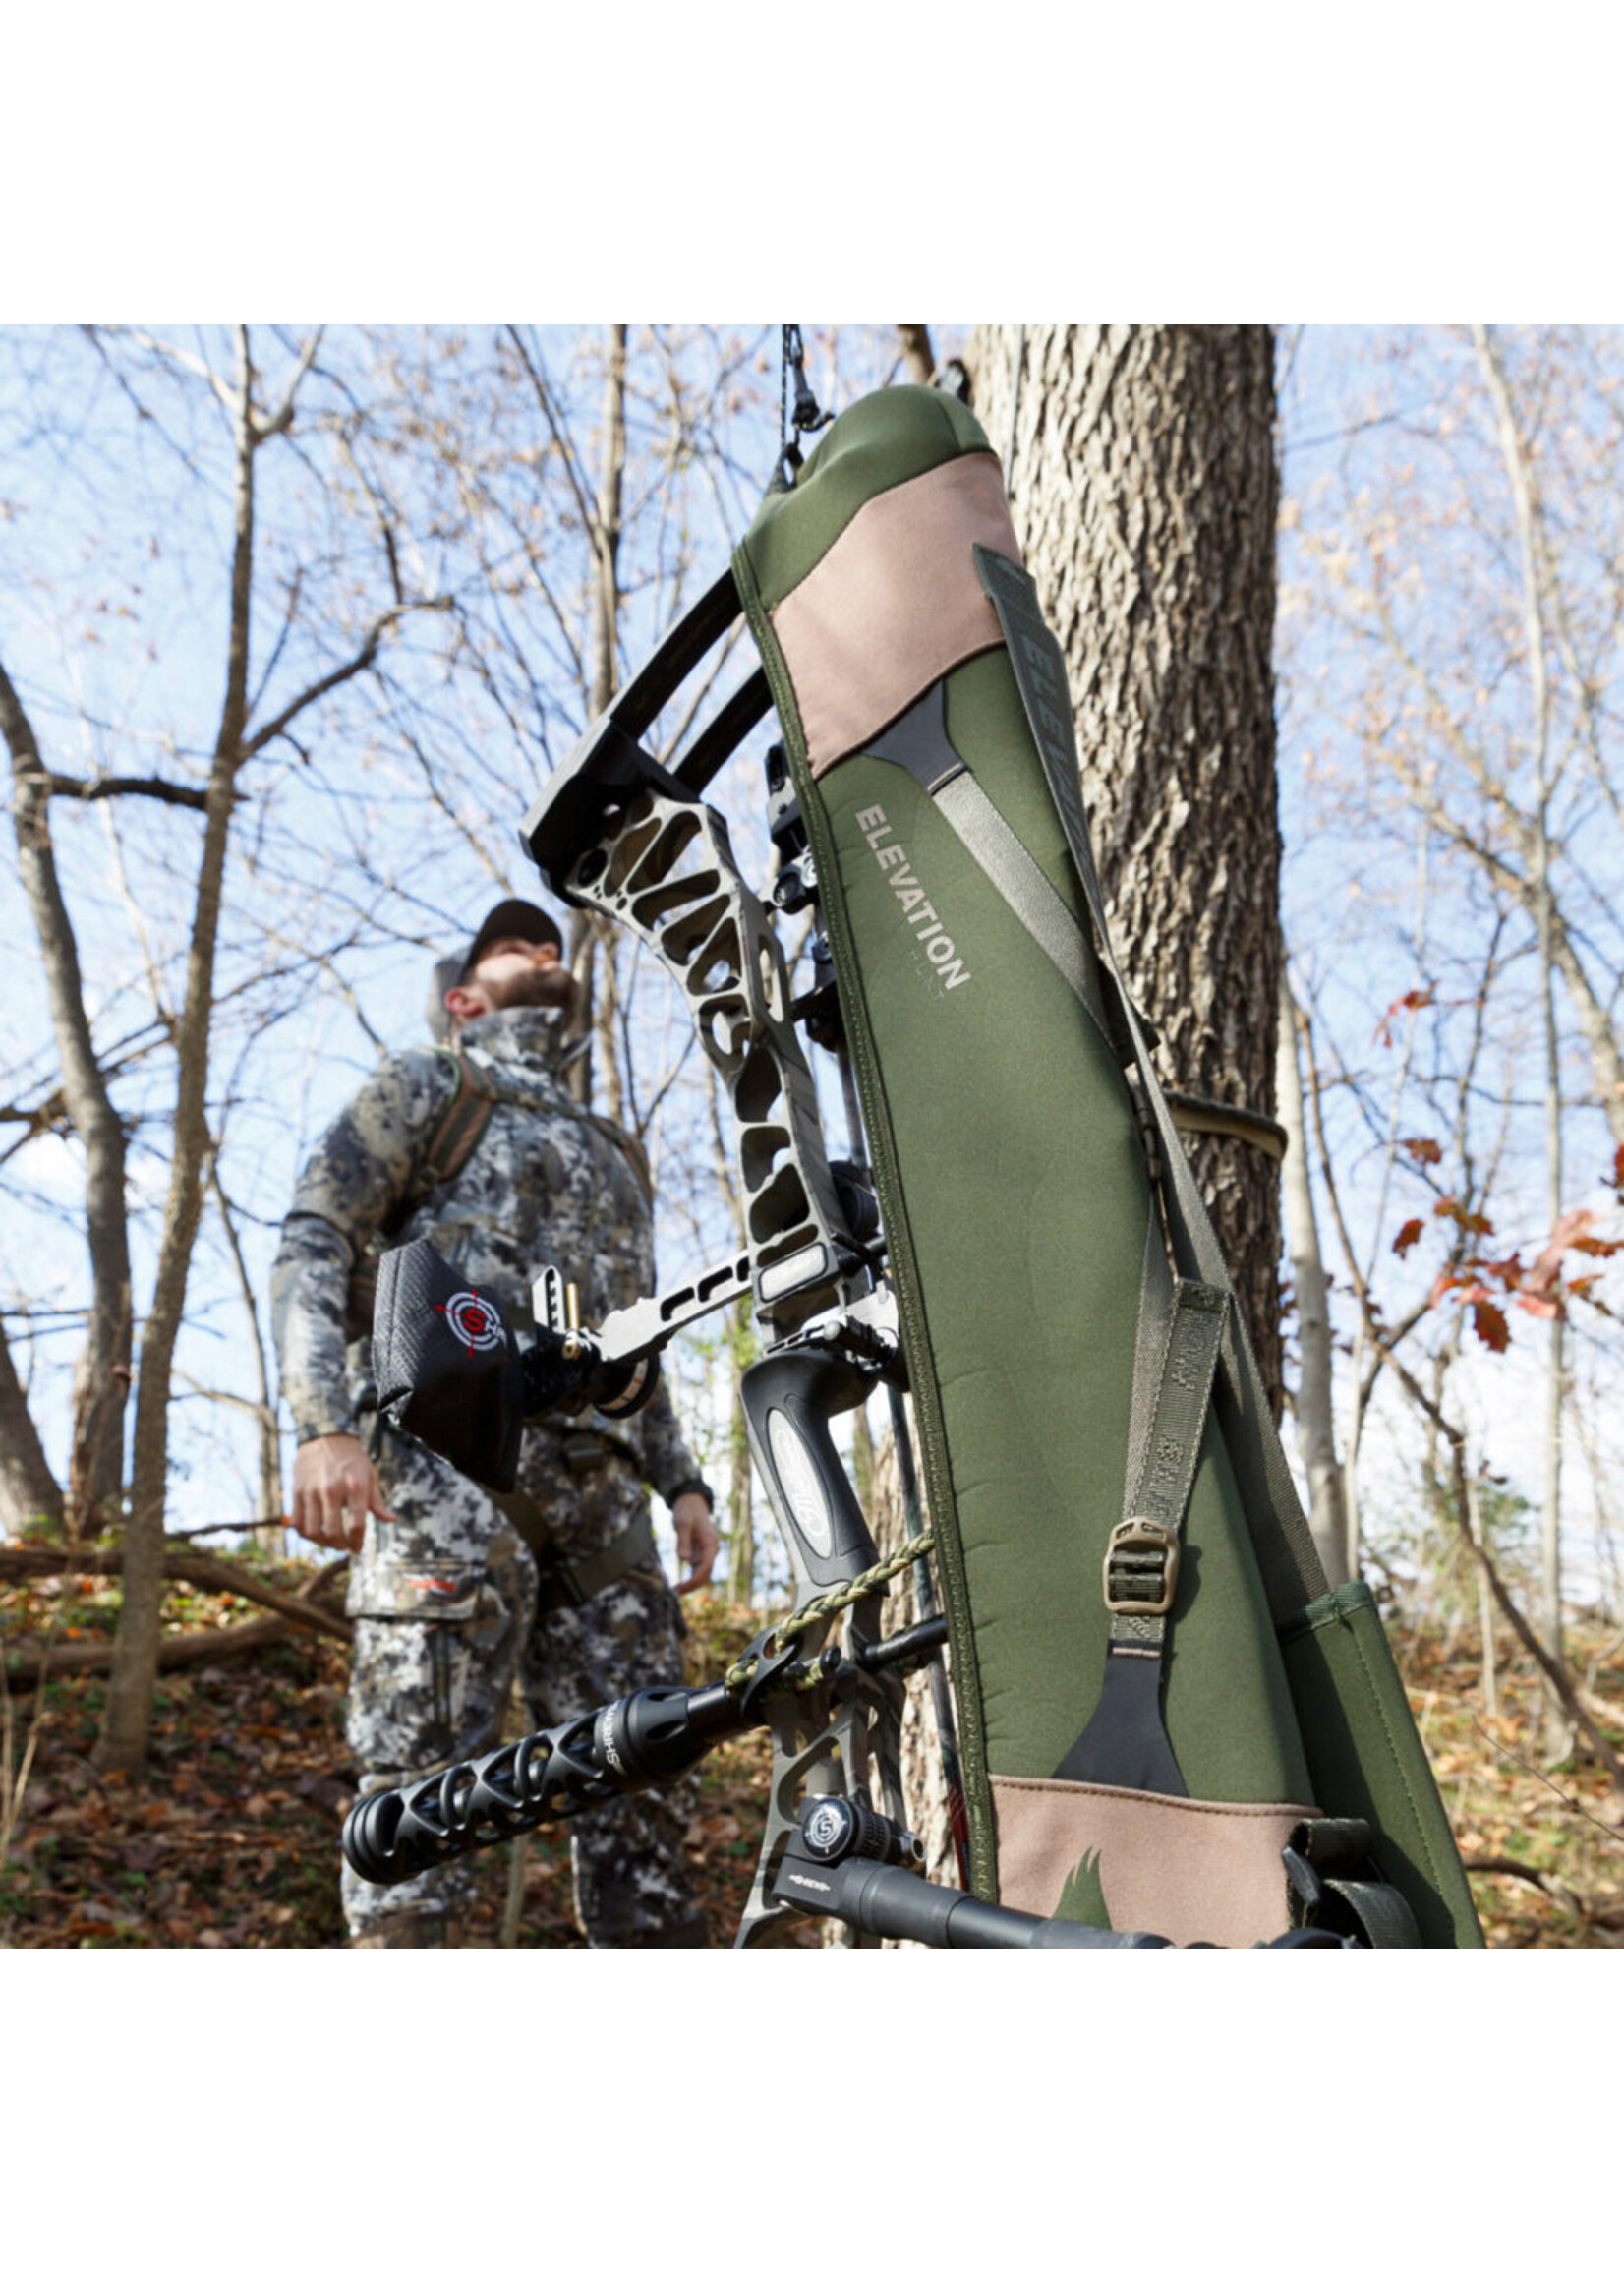 elevation Elevation Quick Release Bow Carry Sling